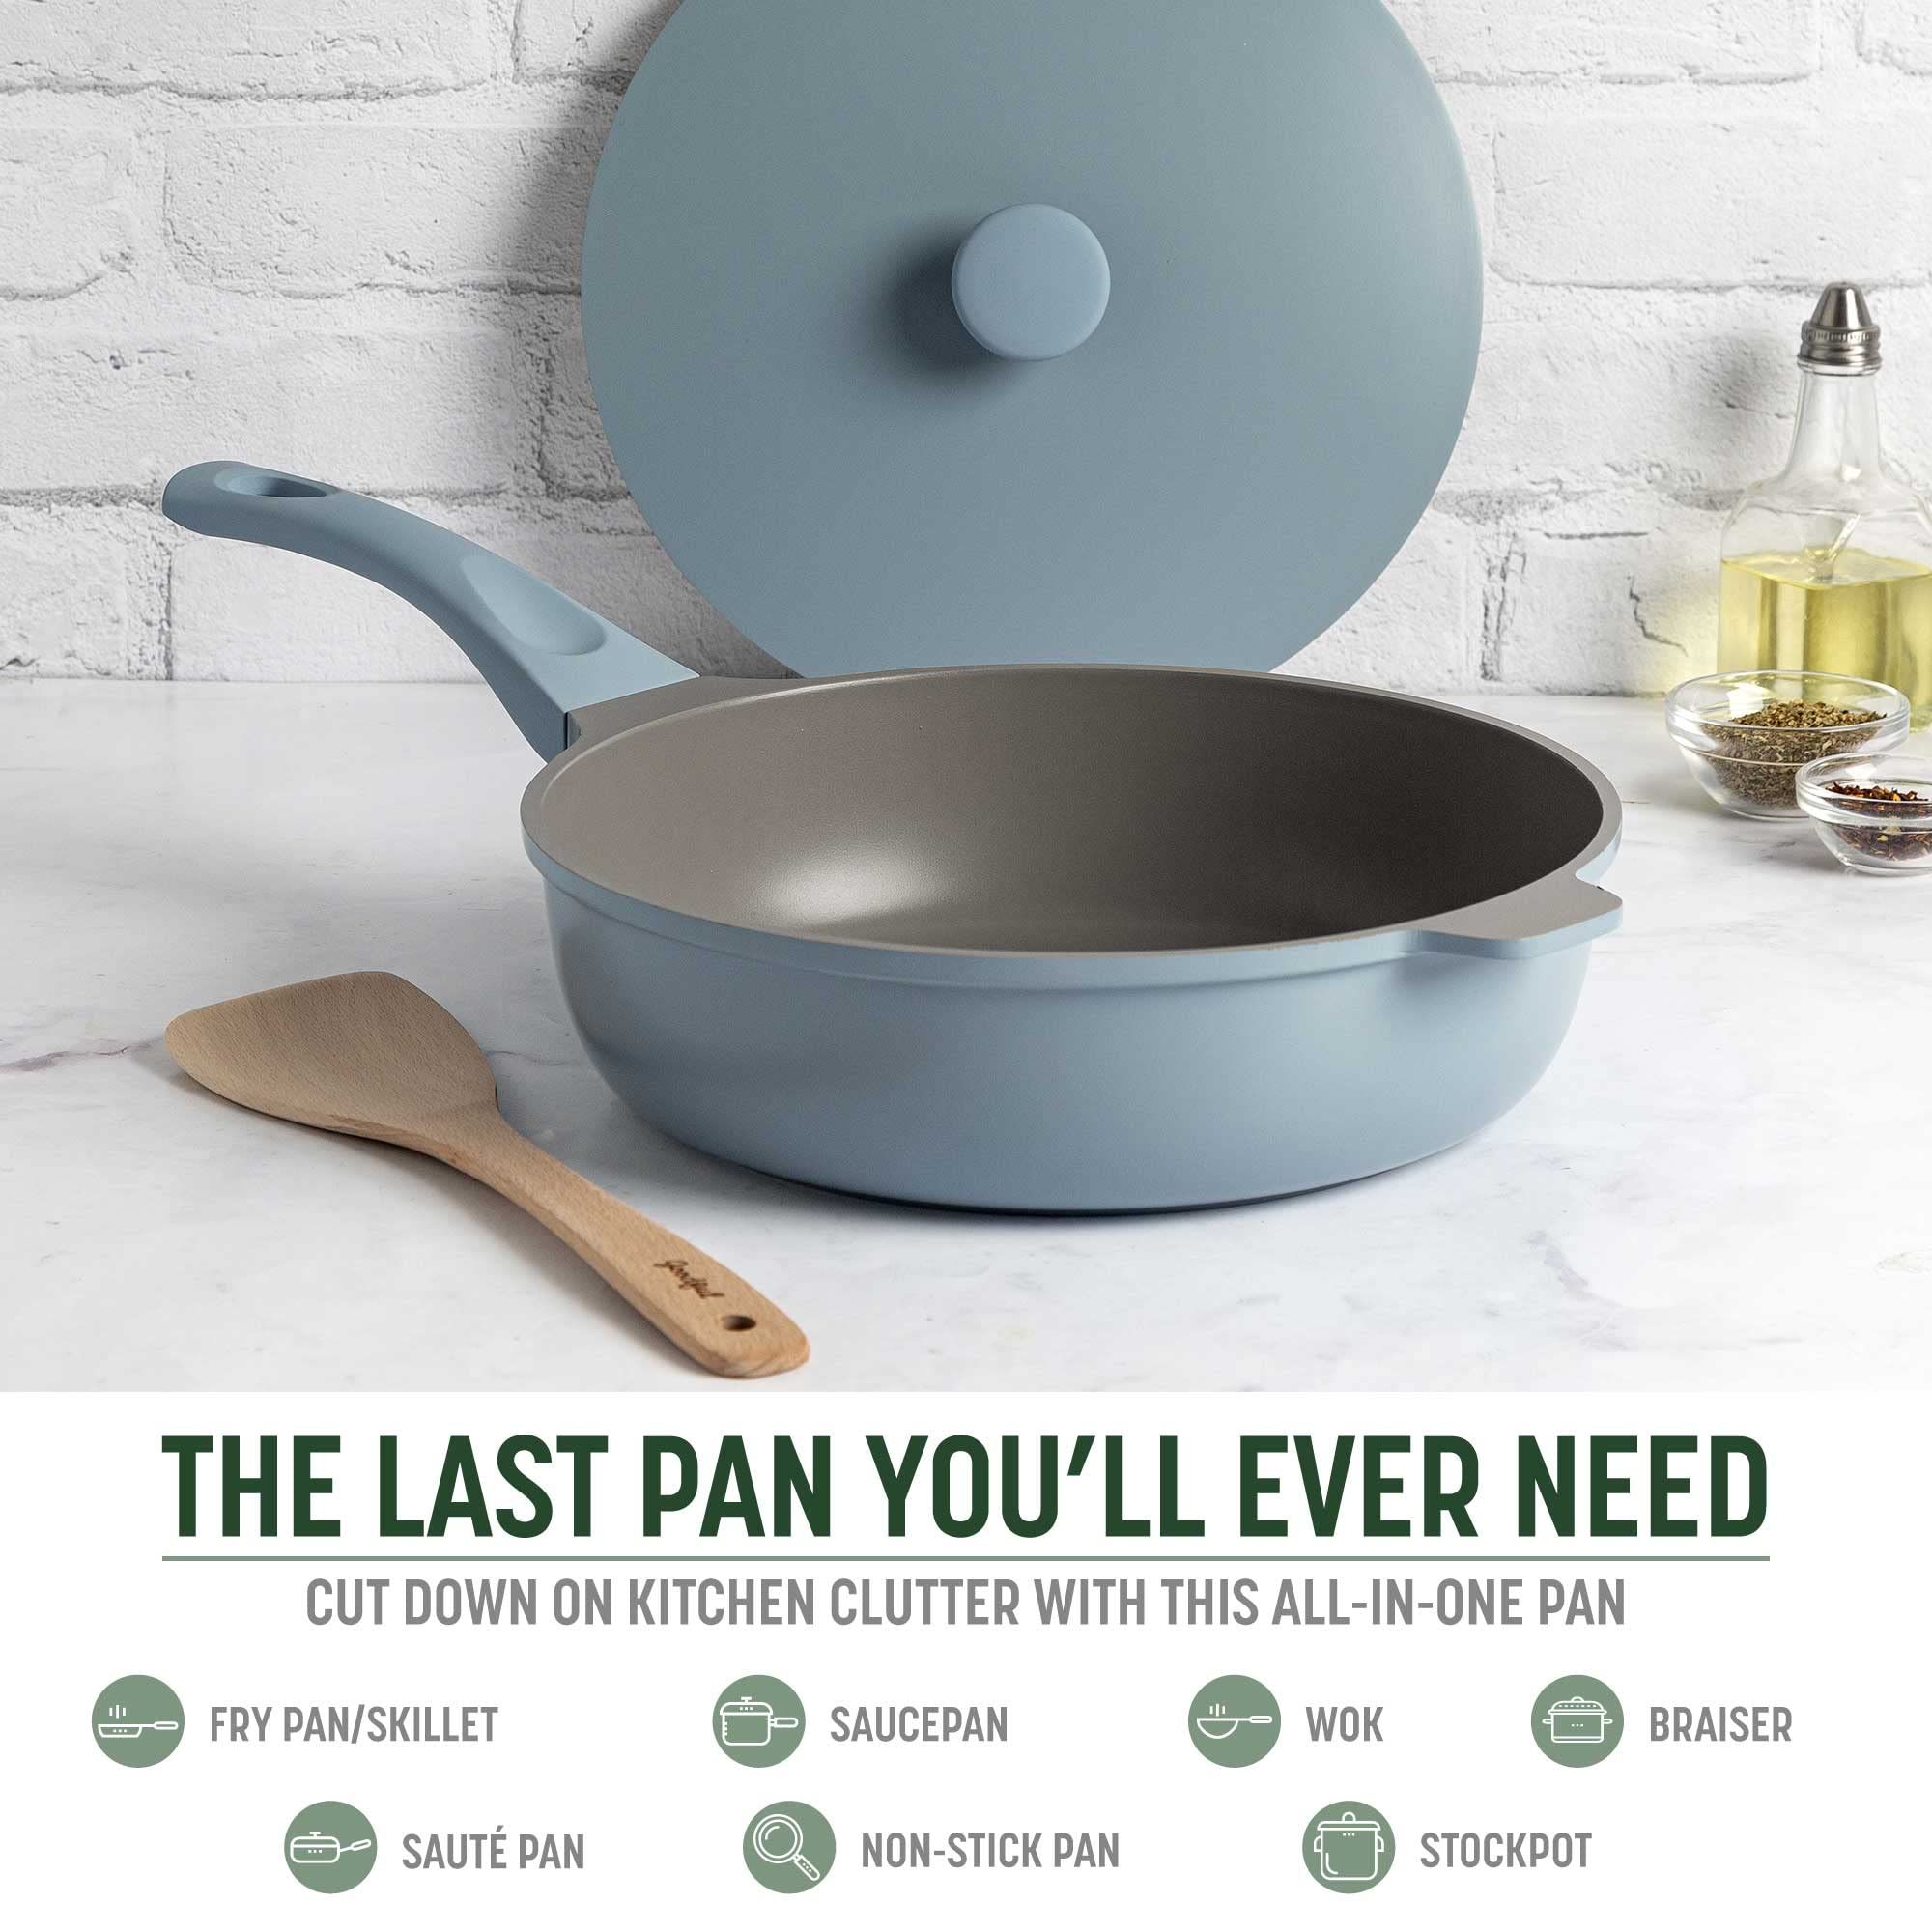 Goodful All-in-One Pan, Multilayer Nonstick, High-Performance Cast Construction, Multipurpose Design | Amazon (US)